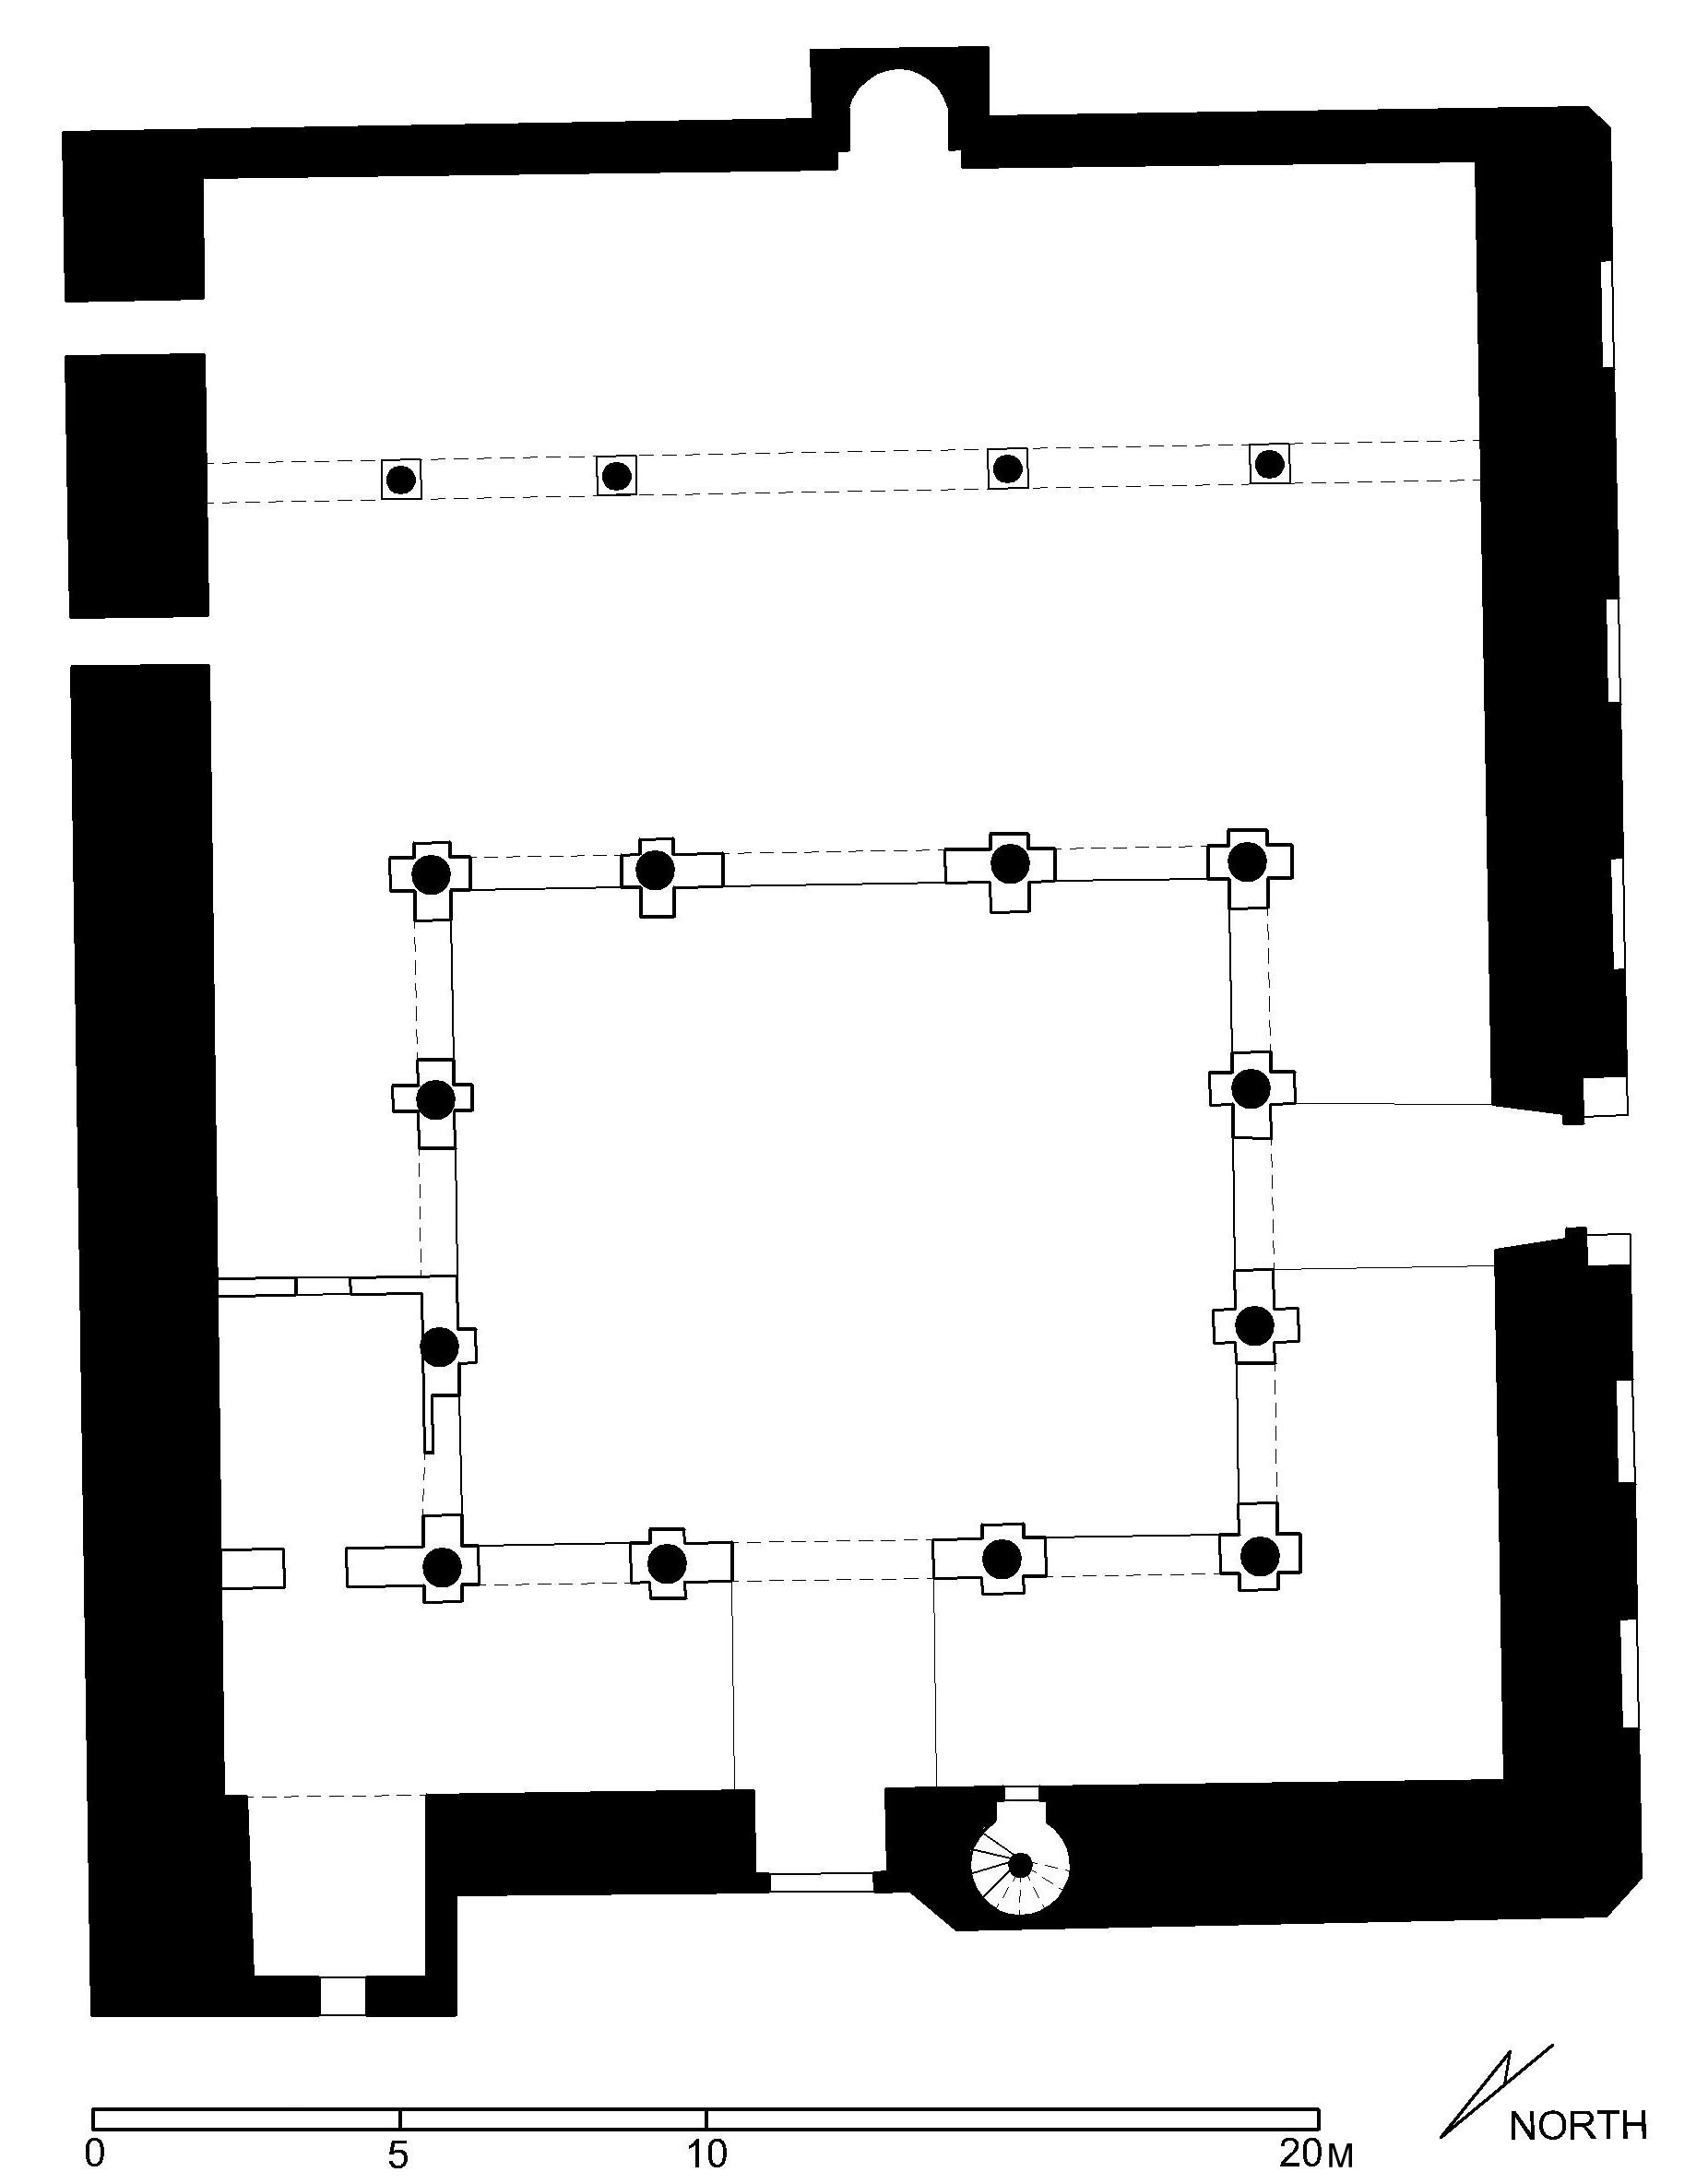 Masjid Sitt Hadaq - Floor plan of mosque (after Meinecke) in AutoCAD 2000 format. Click the download button to download a zipped file containing the .dwg file.